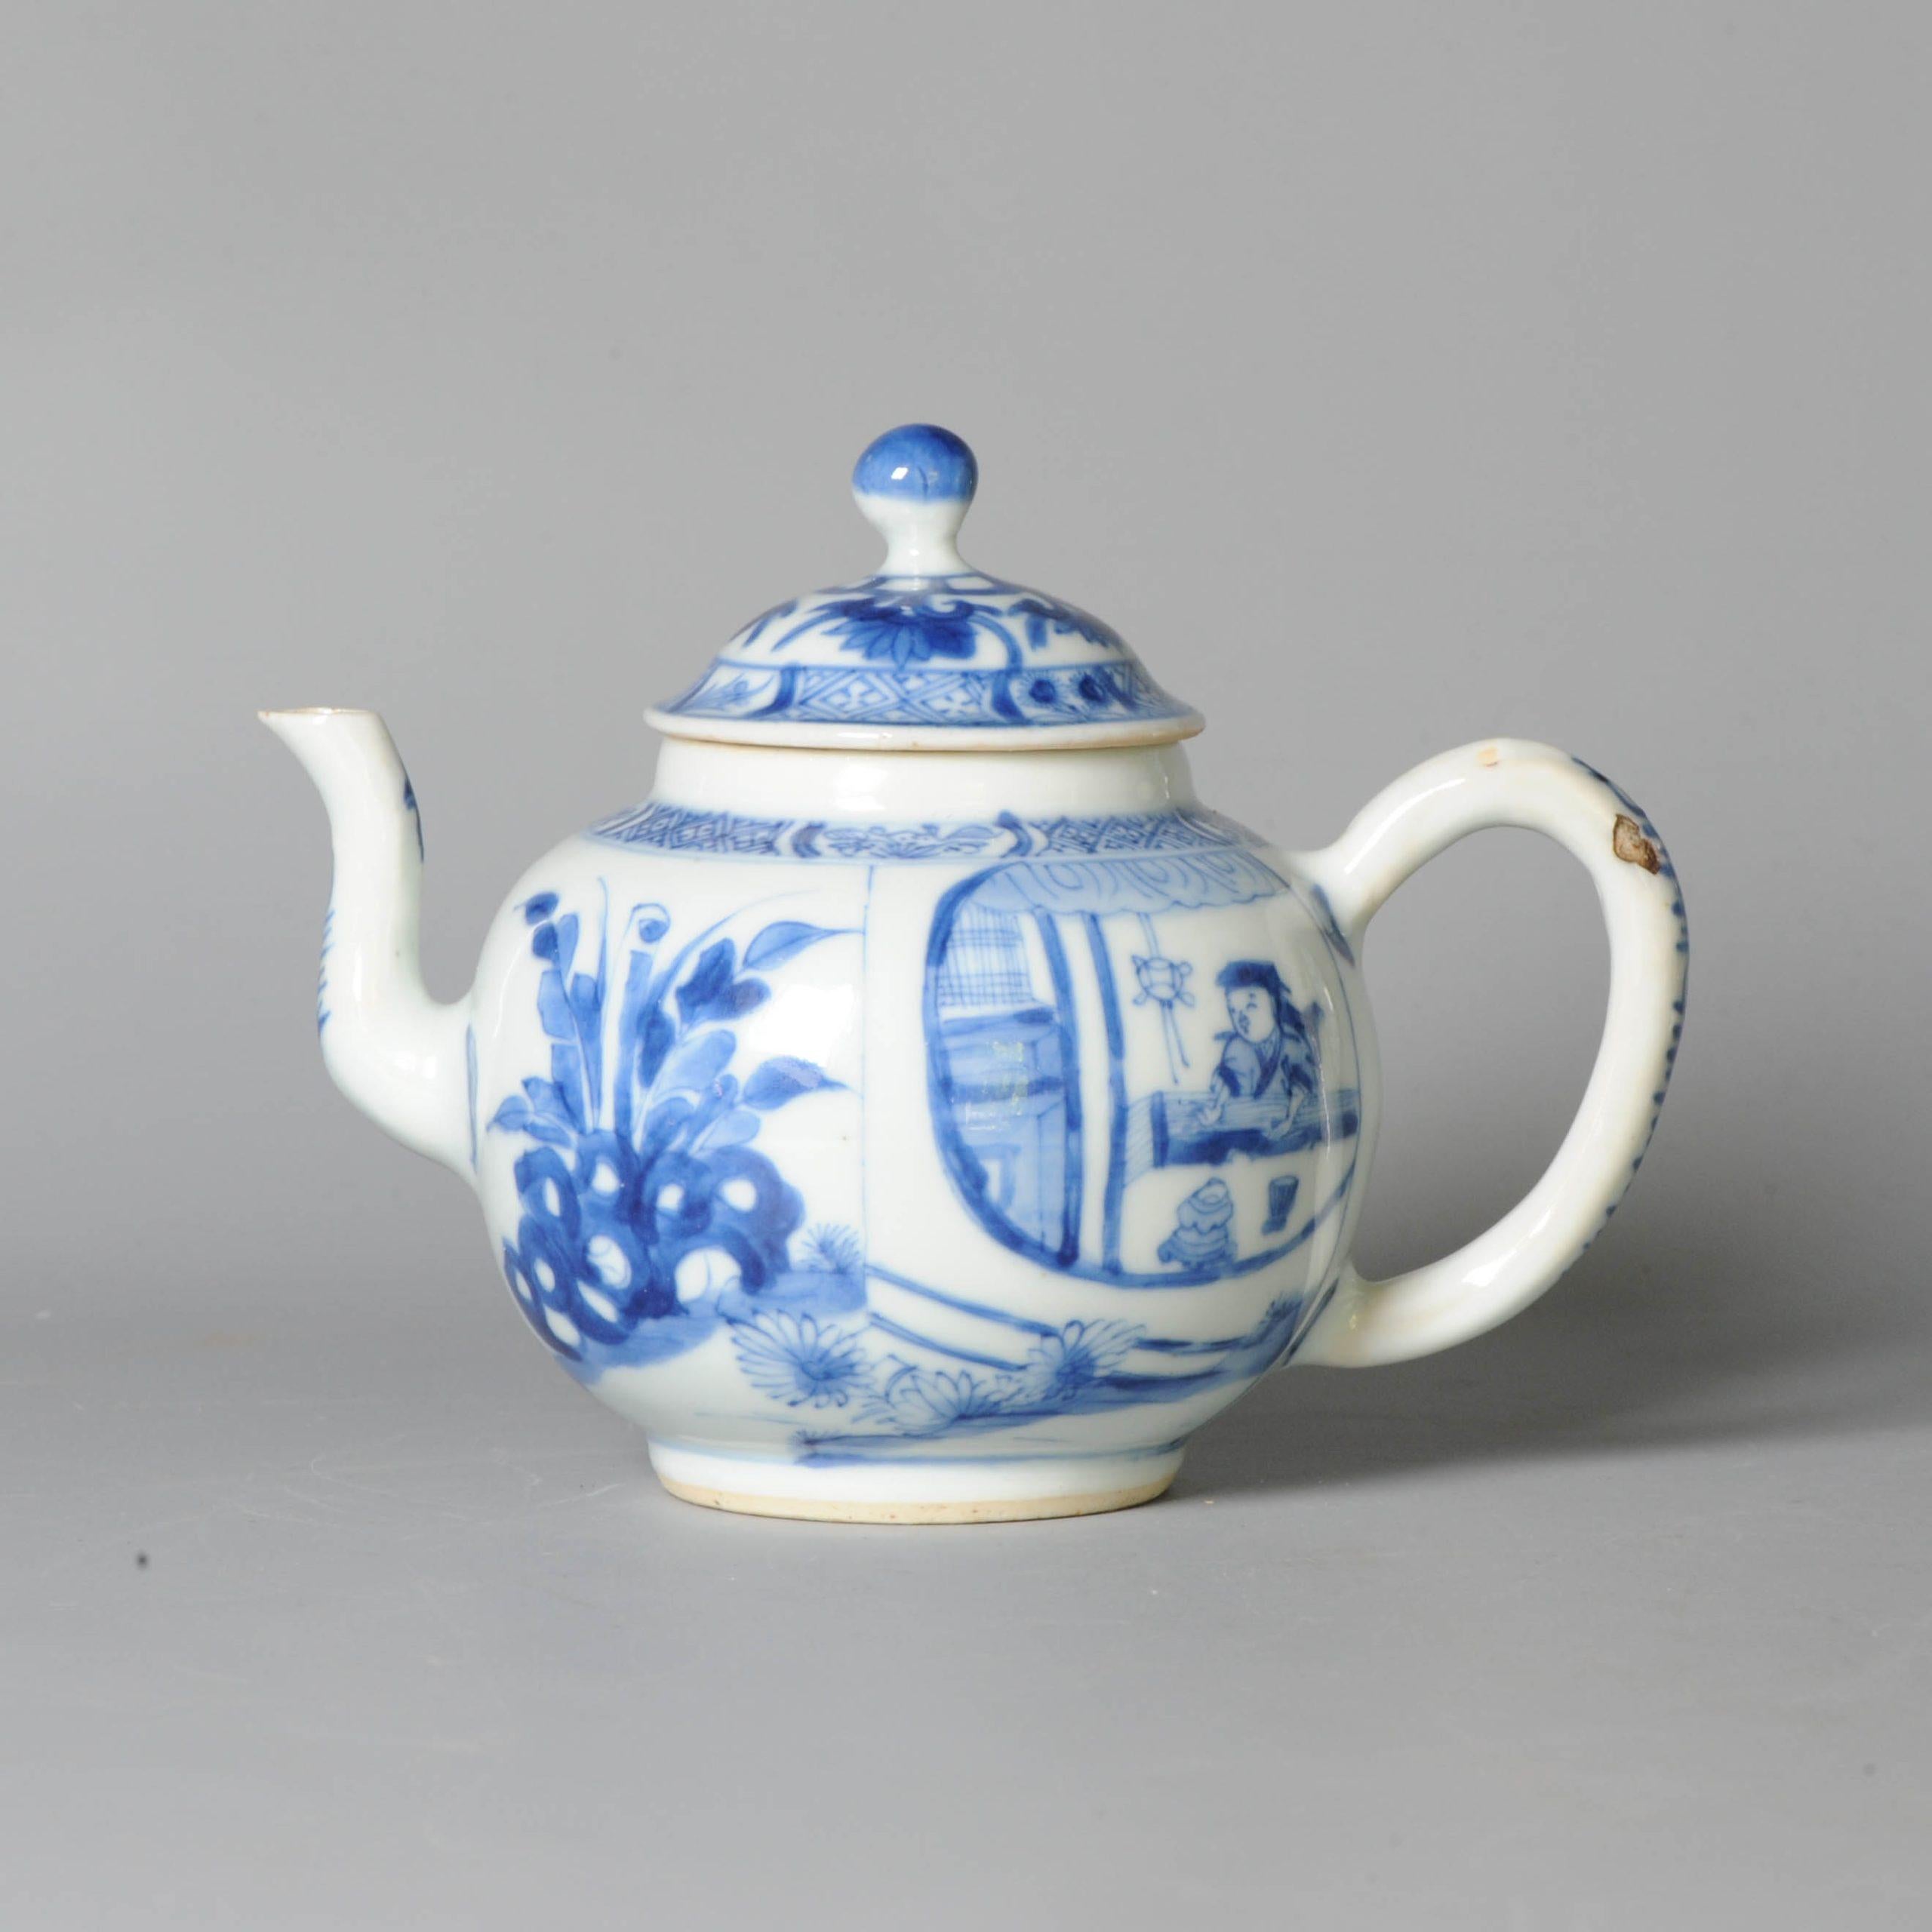 Antique Chinese Porcelain Kangxi Period Teapot Famille Noire Rose Flowers In Good Condition For Sale In Amsterdam, Noord Holland